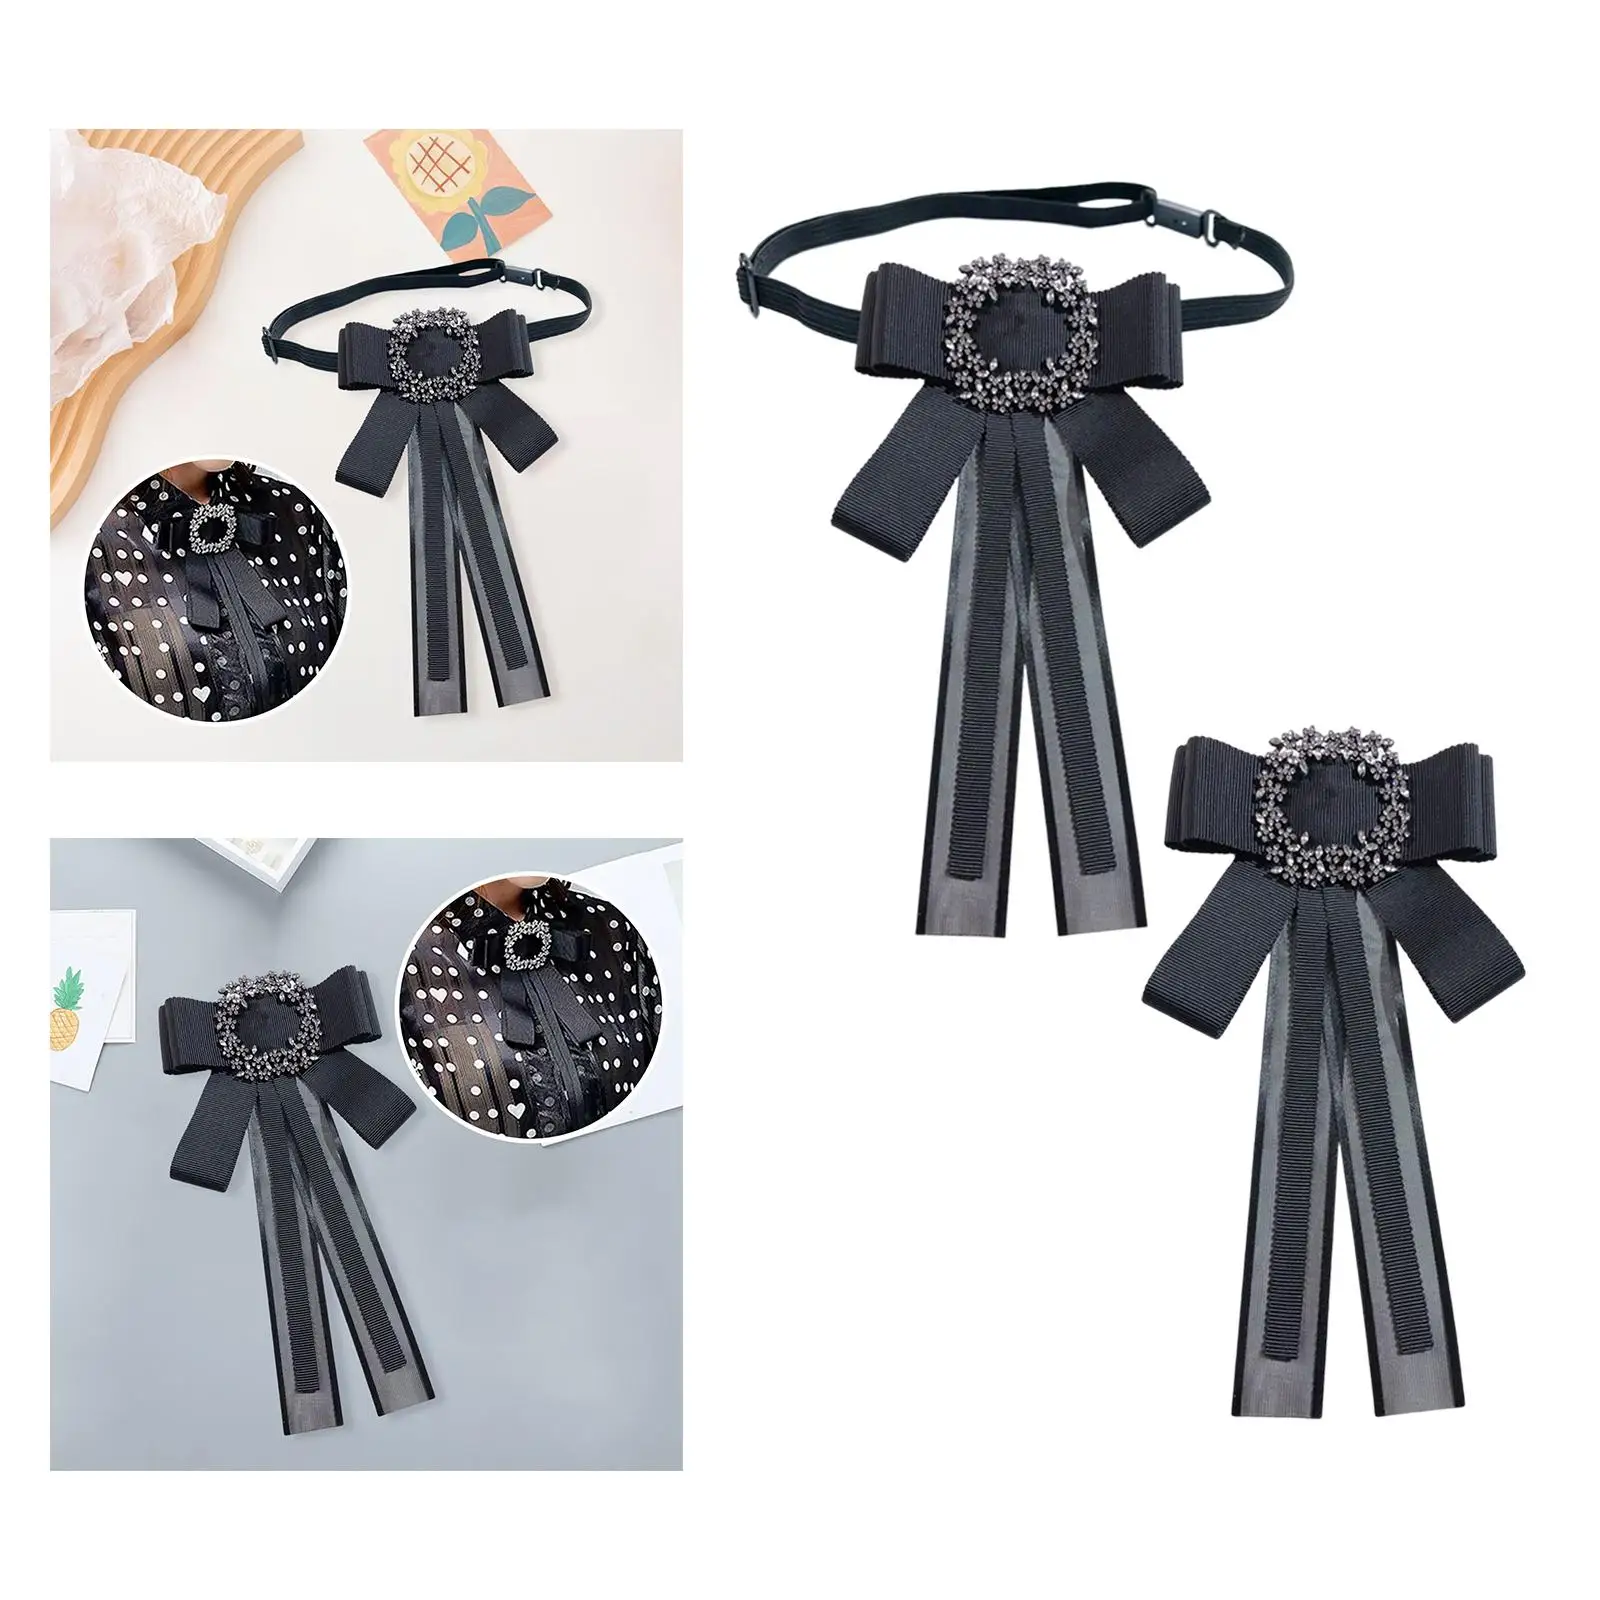 Retro Style Bow Tie Collar Jewelry Girls Clothing Accessories Corsage Gift Black Necktie for Wedding Party Suit Banquet Prom